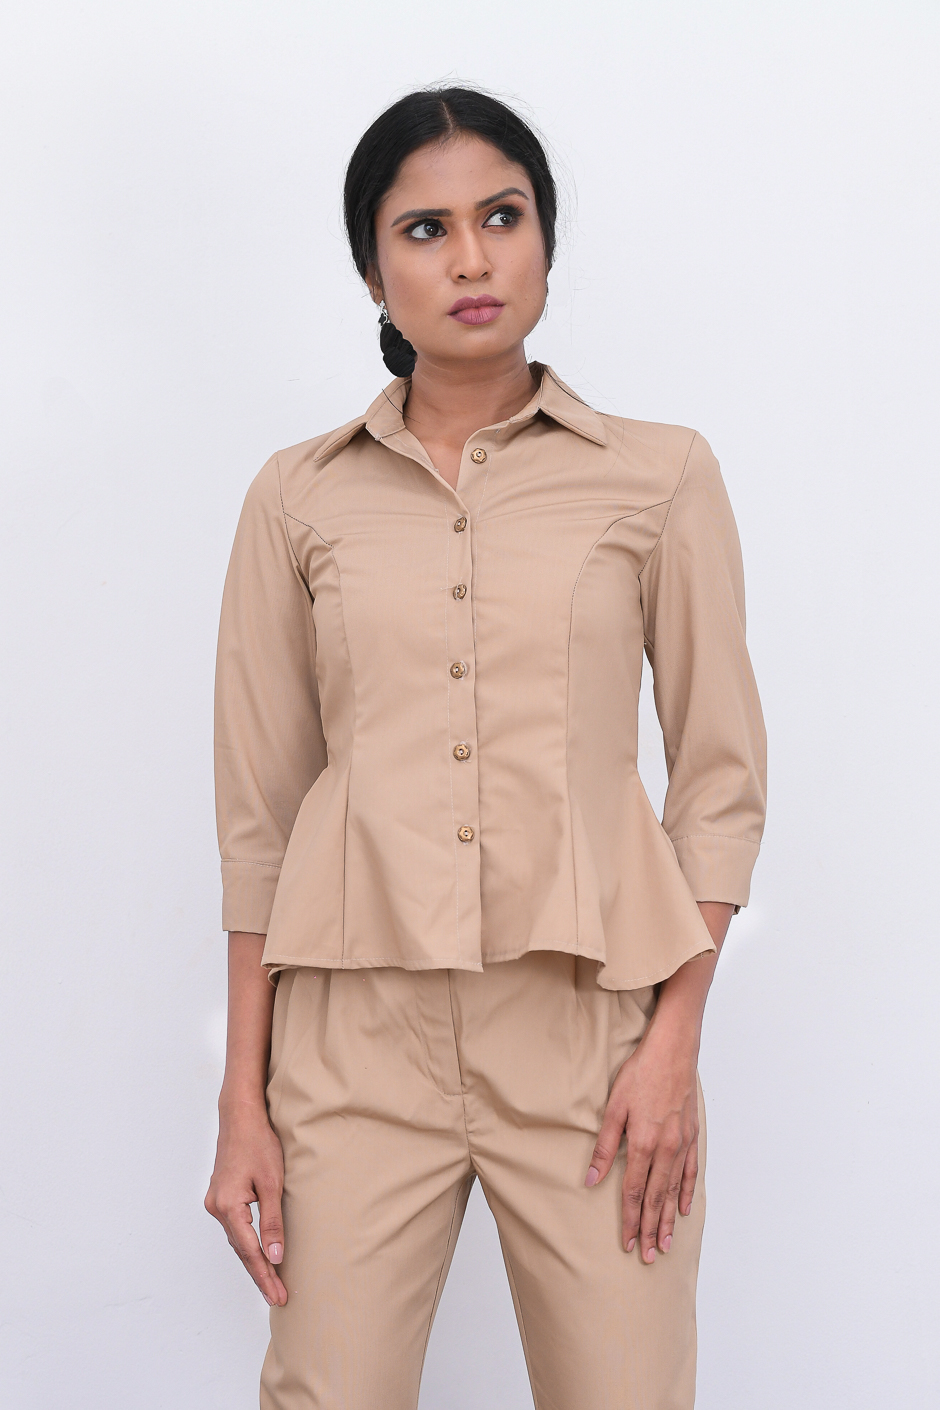 Destiny - Peplum Blazer Top is Beige Cotton made , Button Front and with 3/4 length sleeves